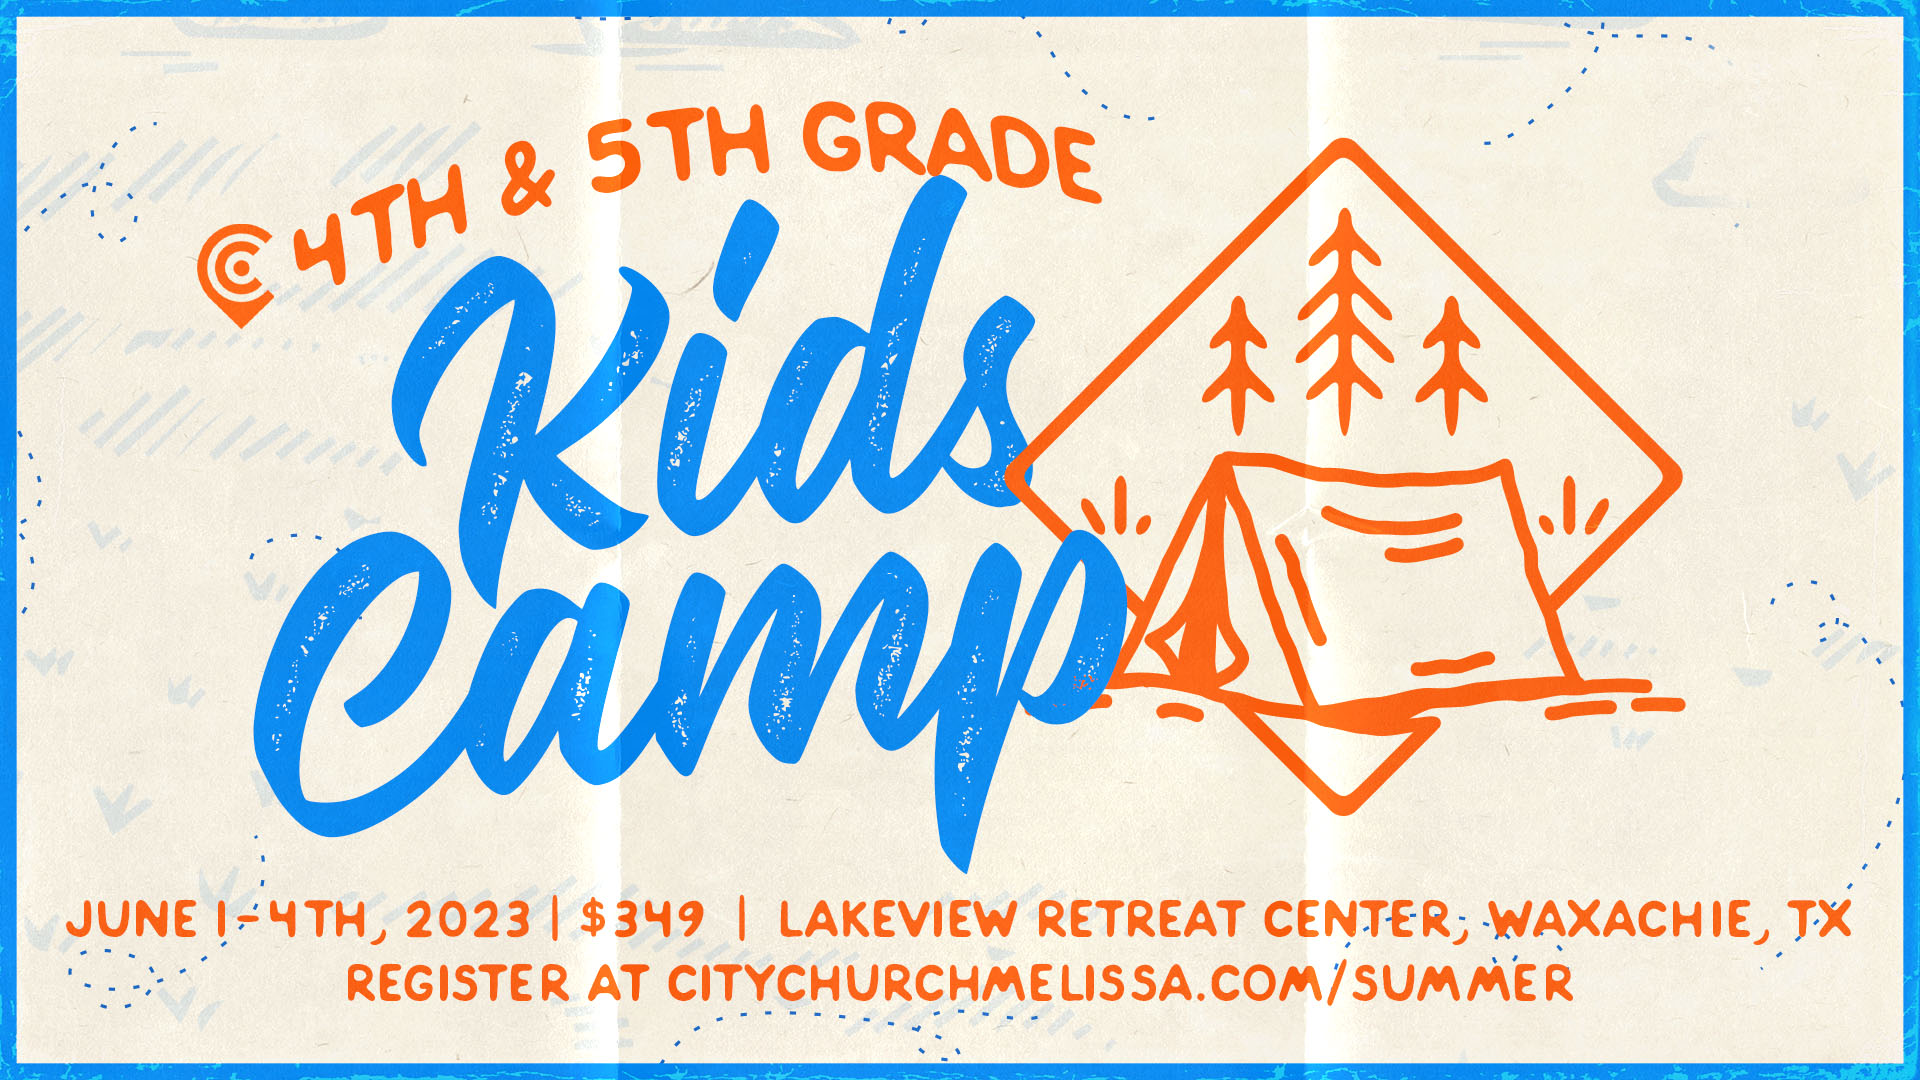 Calling all 4th and 5th Graders! This amazing camp in Waxahachie, TX is the perfect “first sleep away” camp. Great Gospel teaching, awesome activities and so much fun! <br>
Click the image to register!